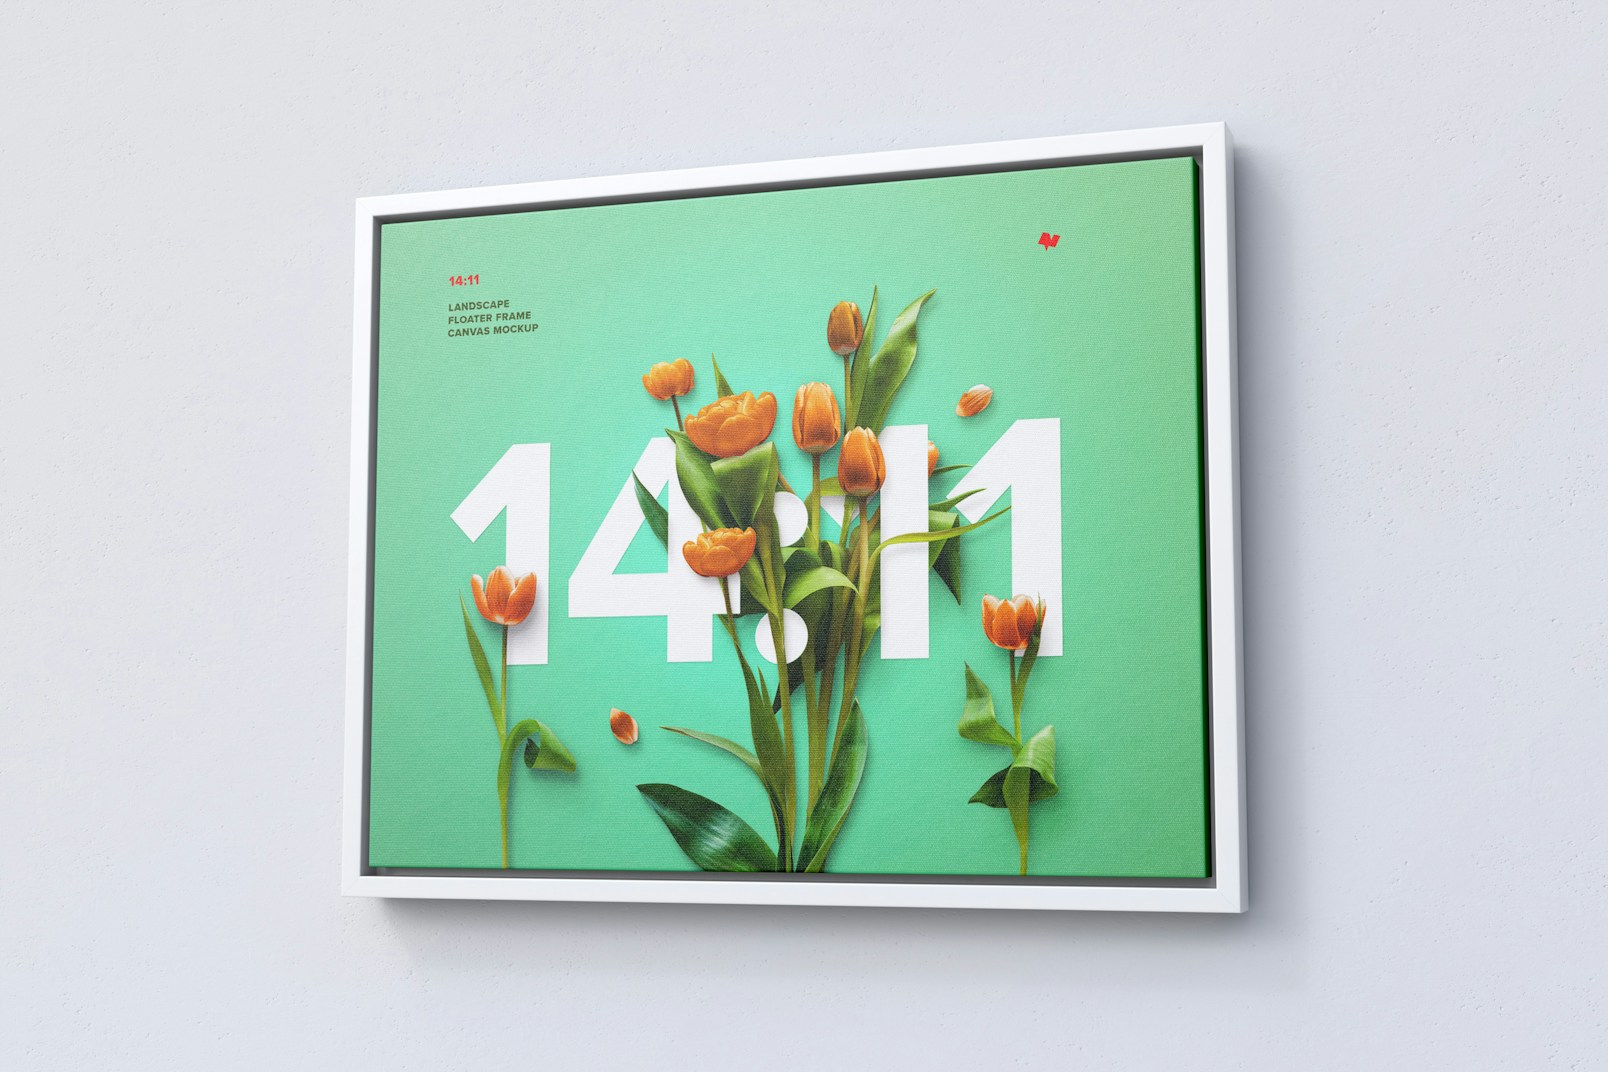 14:11 Landscape Canvas Mockup in Floater Frame, Right View